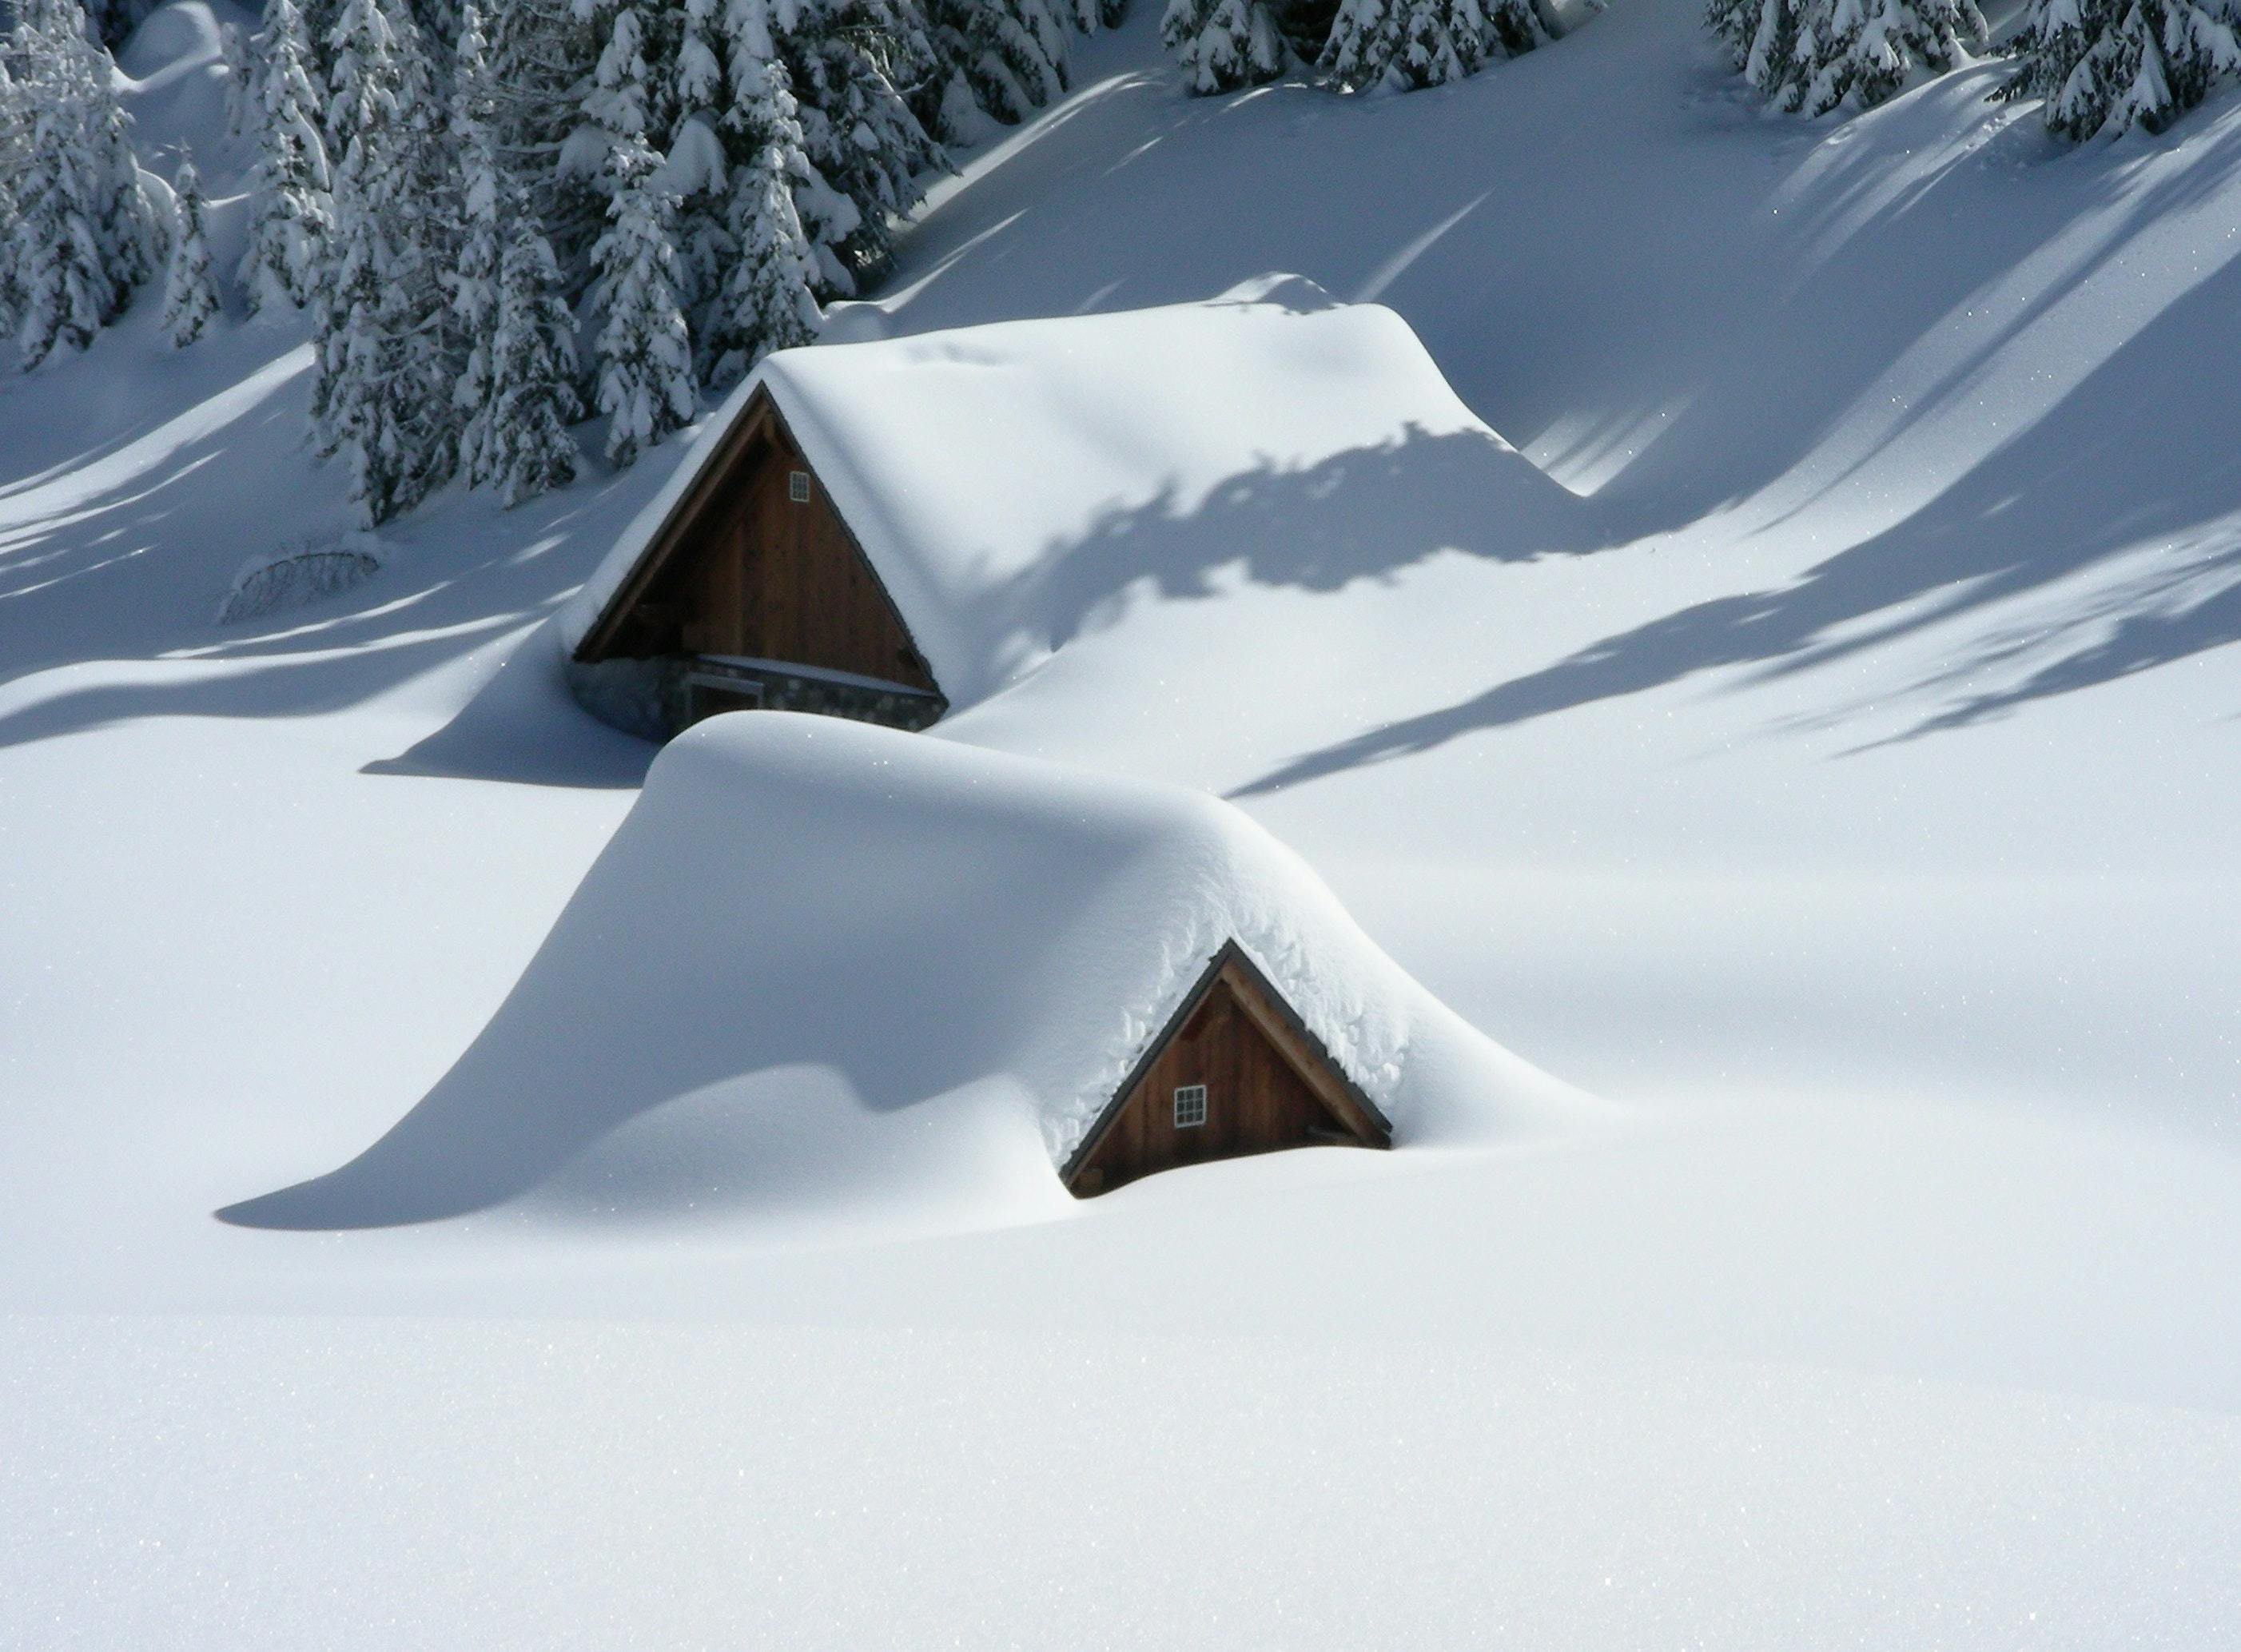 Two cabins are buried in the snow.